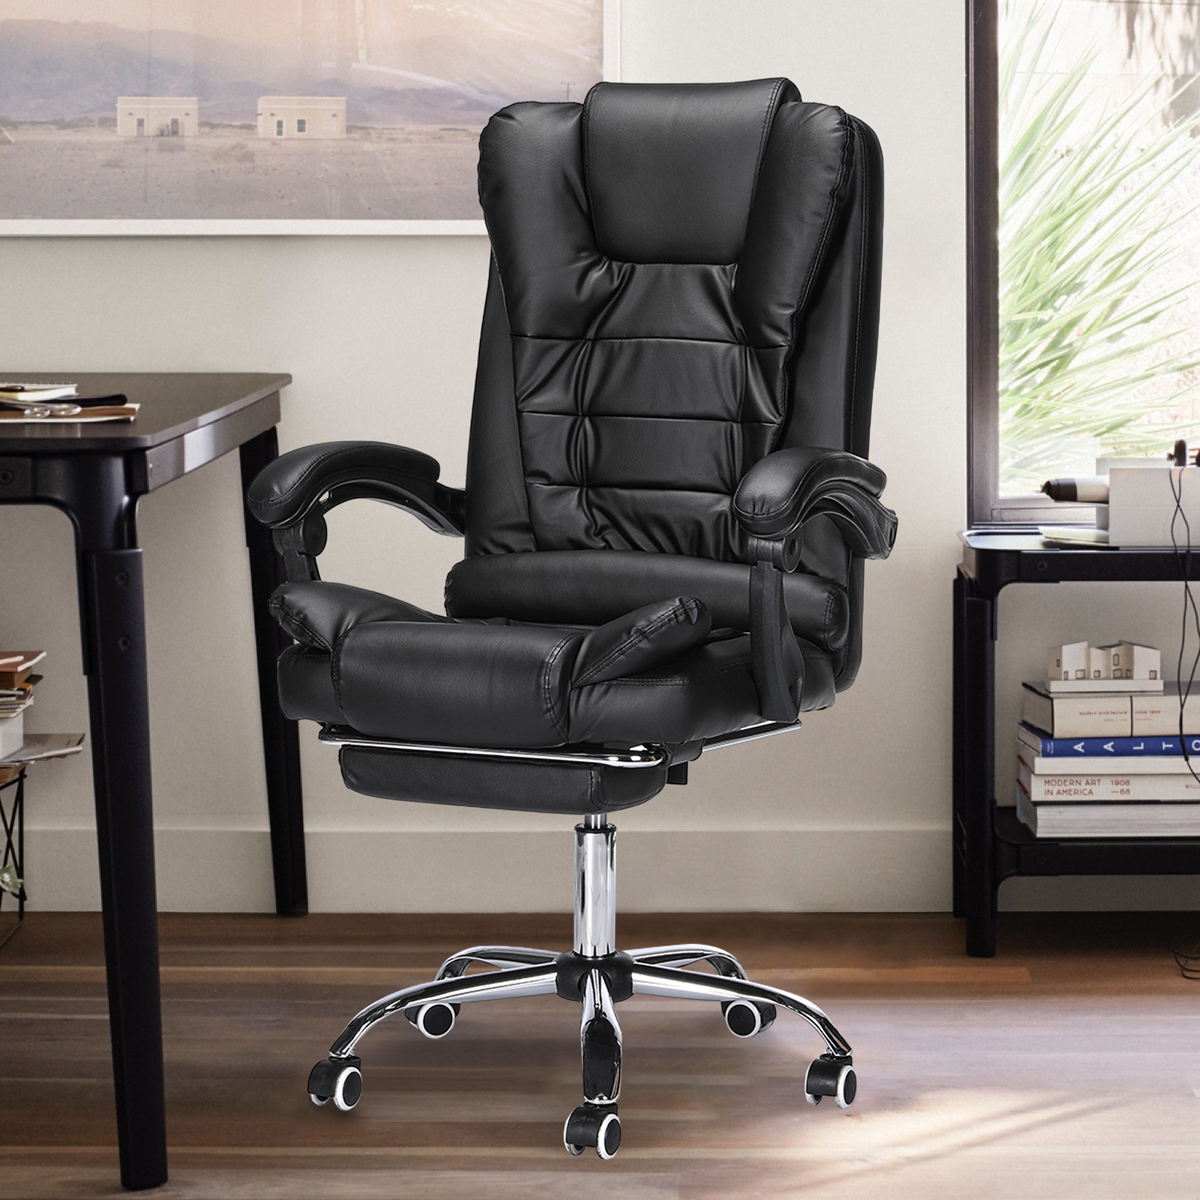 High Quality Executive High Back Office Chair Extra Padded 